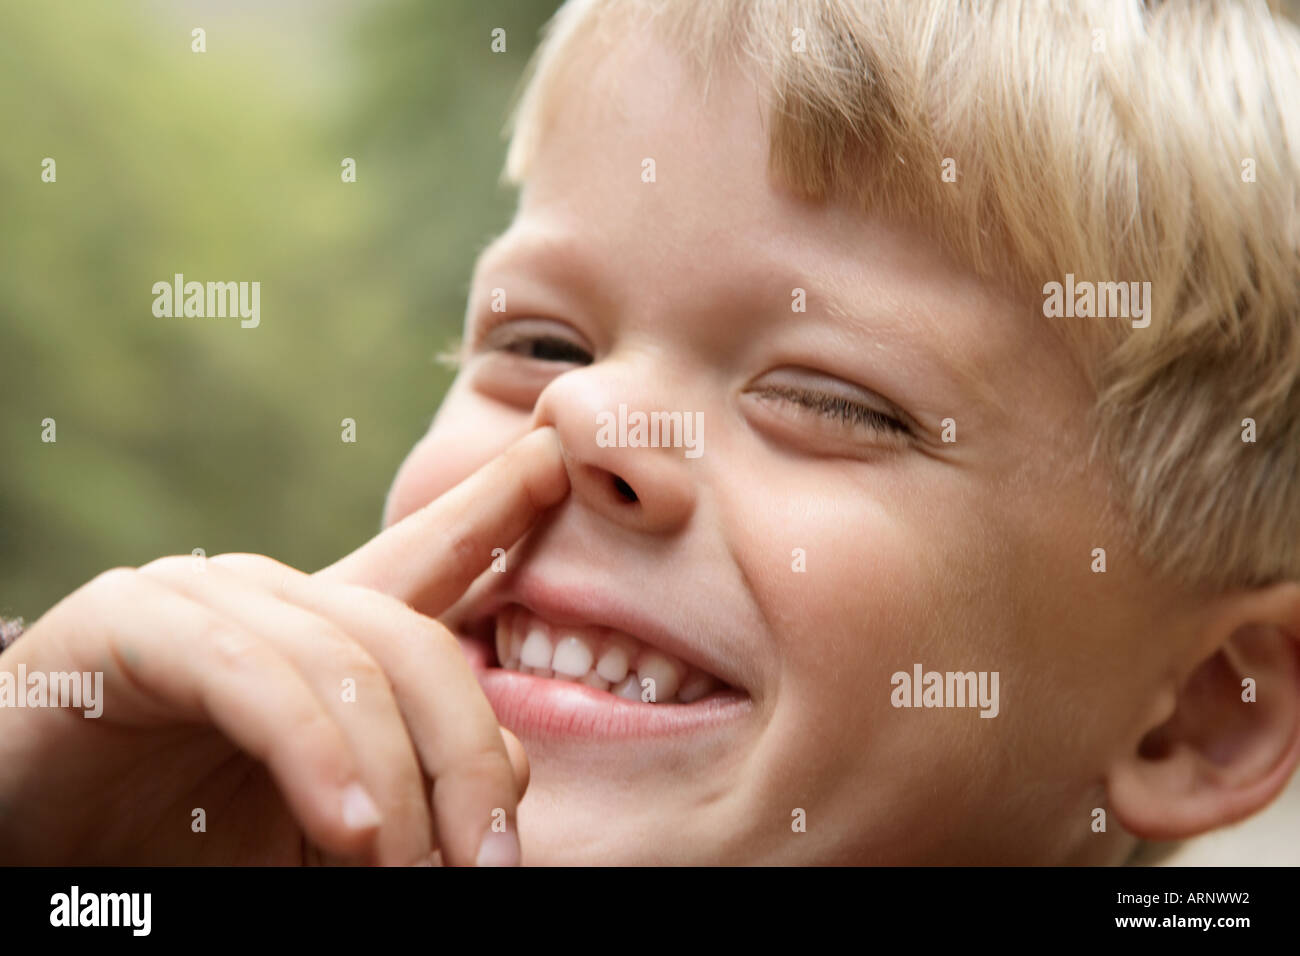 Young boy sticking finger up his nose Stock Photo